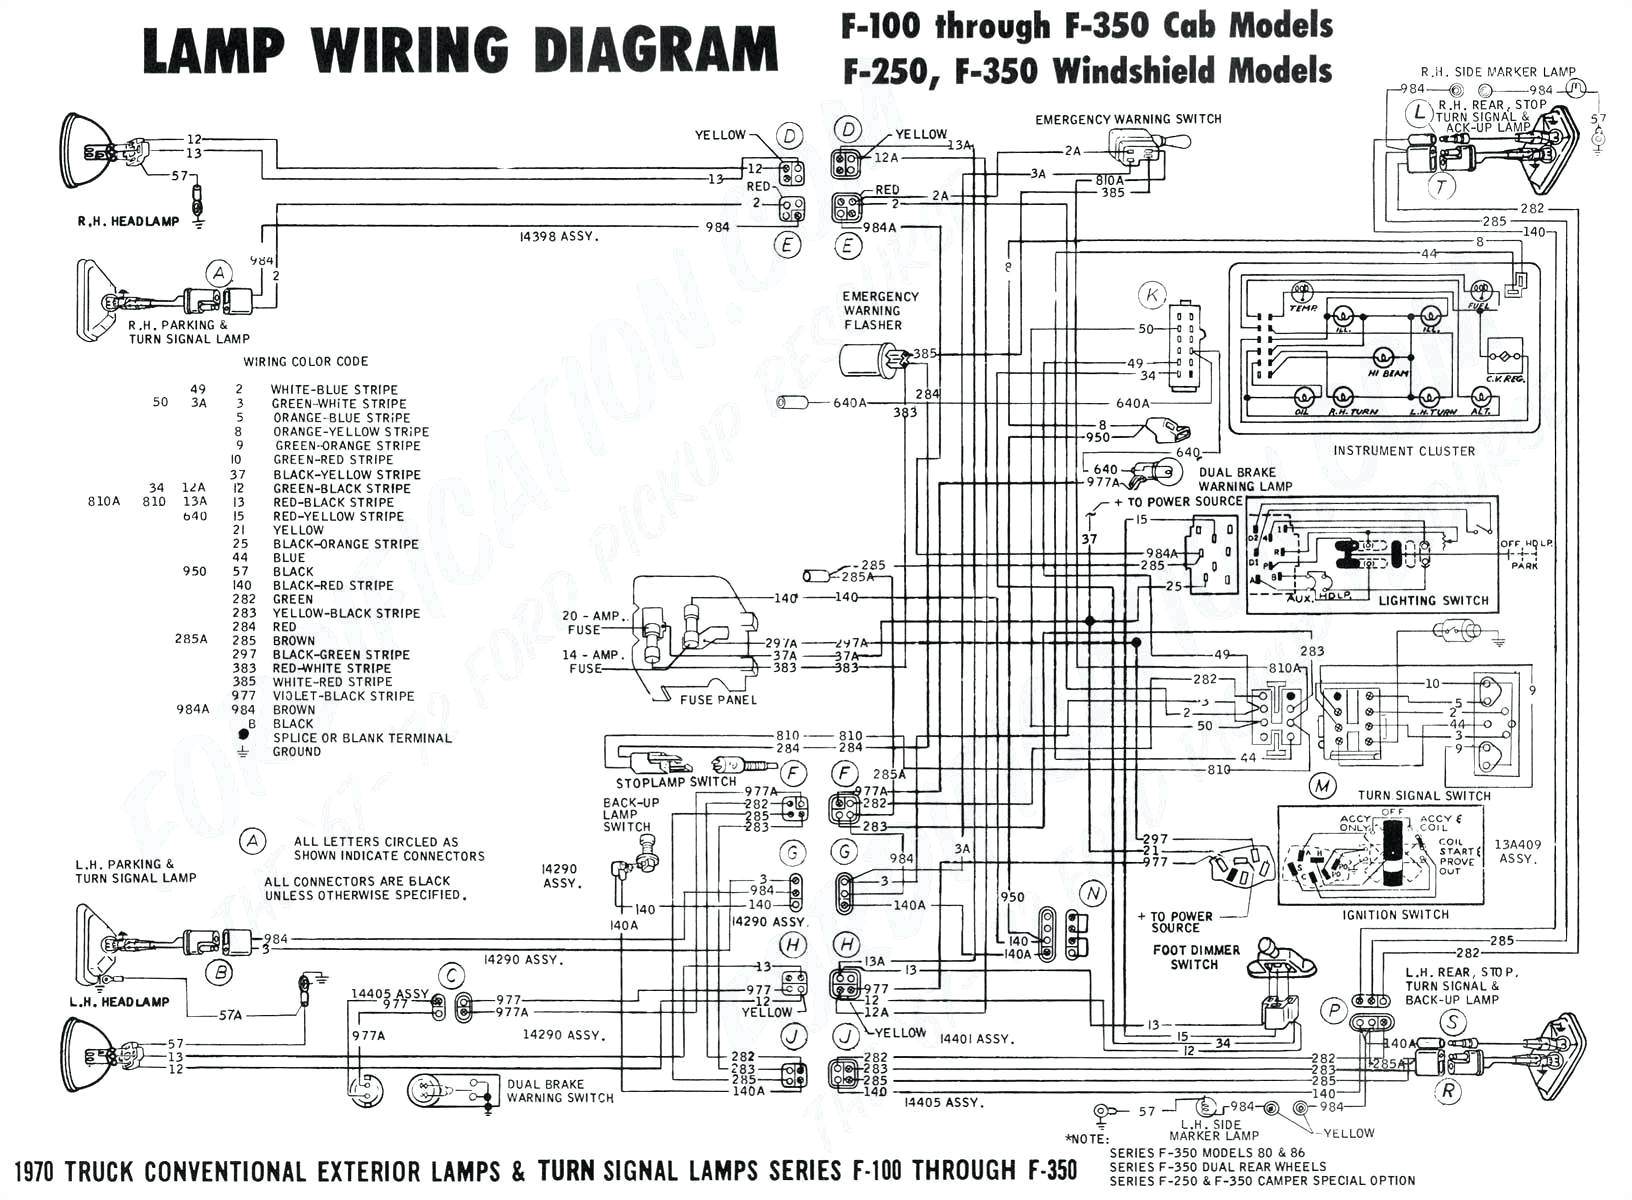 wiring diagram further fuel pump relay along with simple alarm electrical house wiring circuit further dimmer switch circuit diagram